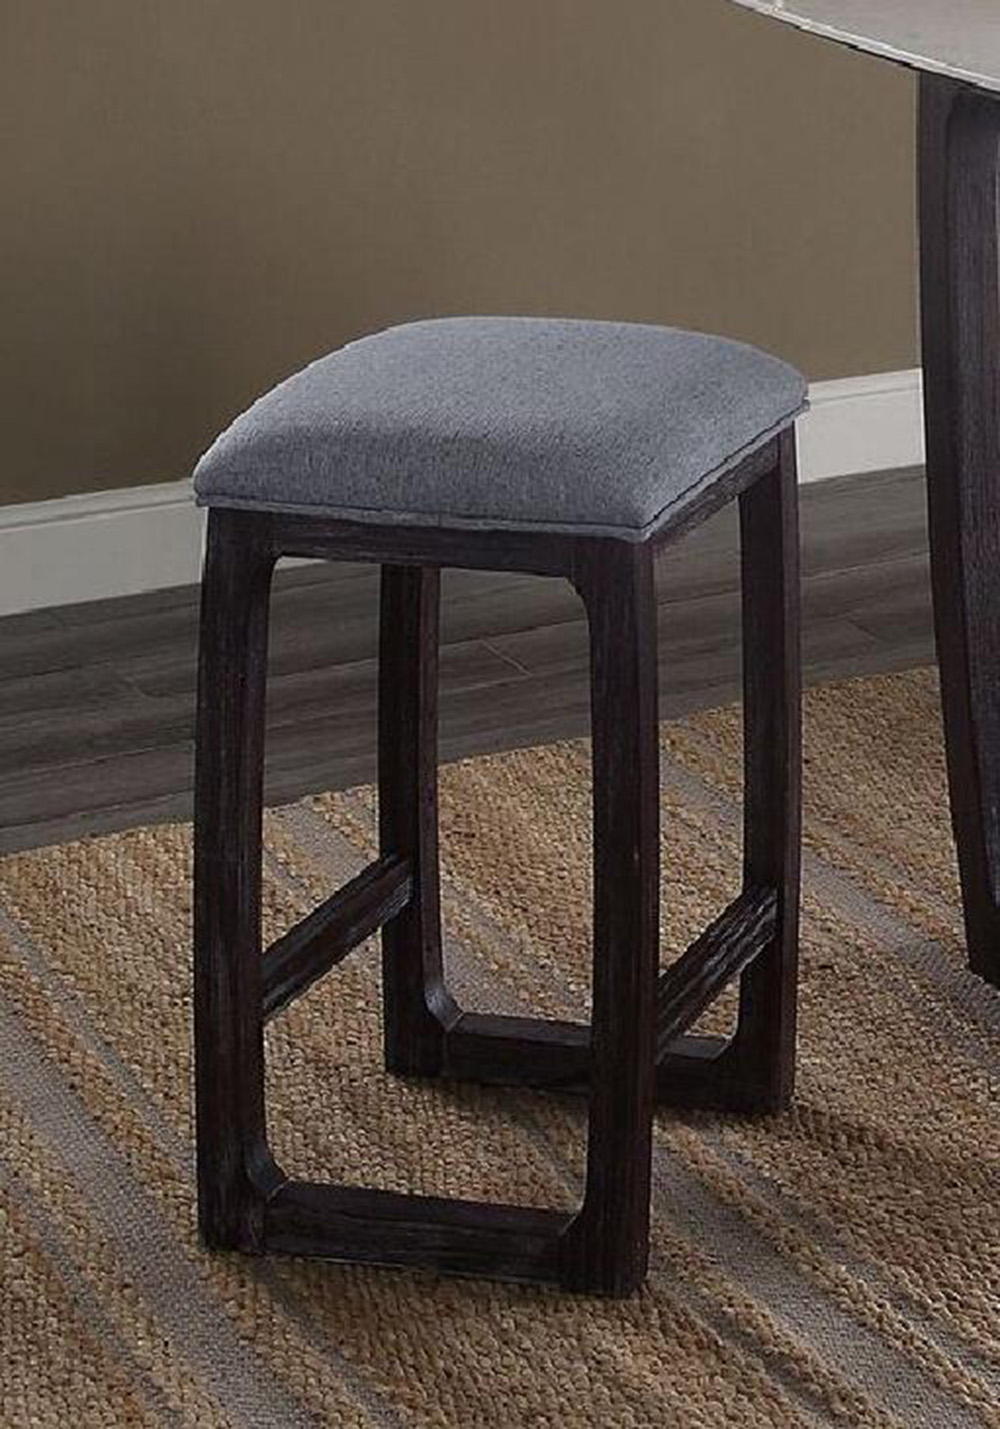 ACME Razo Fabric Upholstered Counter Height Stool, with Wood Frame, for Restaurant, Cafe, Tavern, Office, Living Room - Espresso